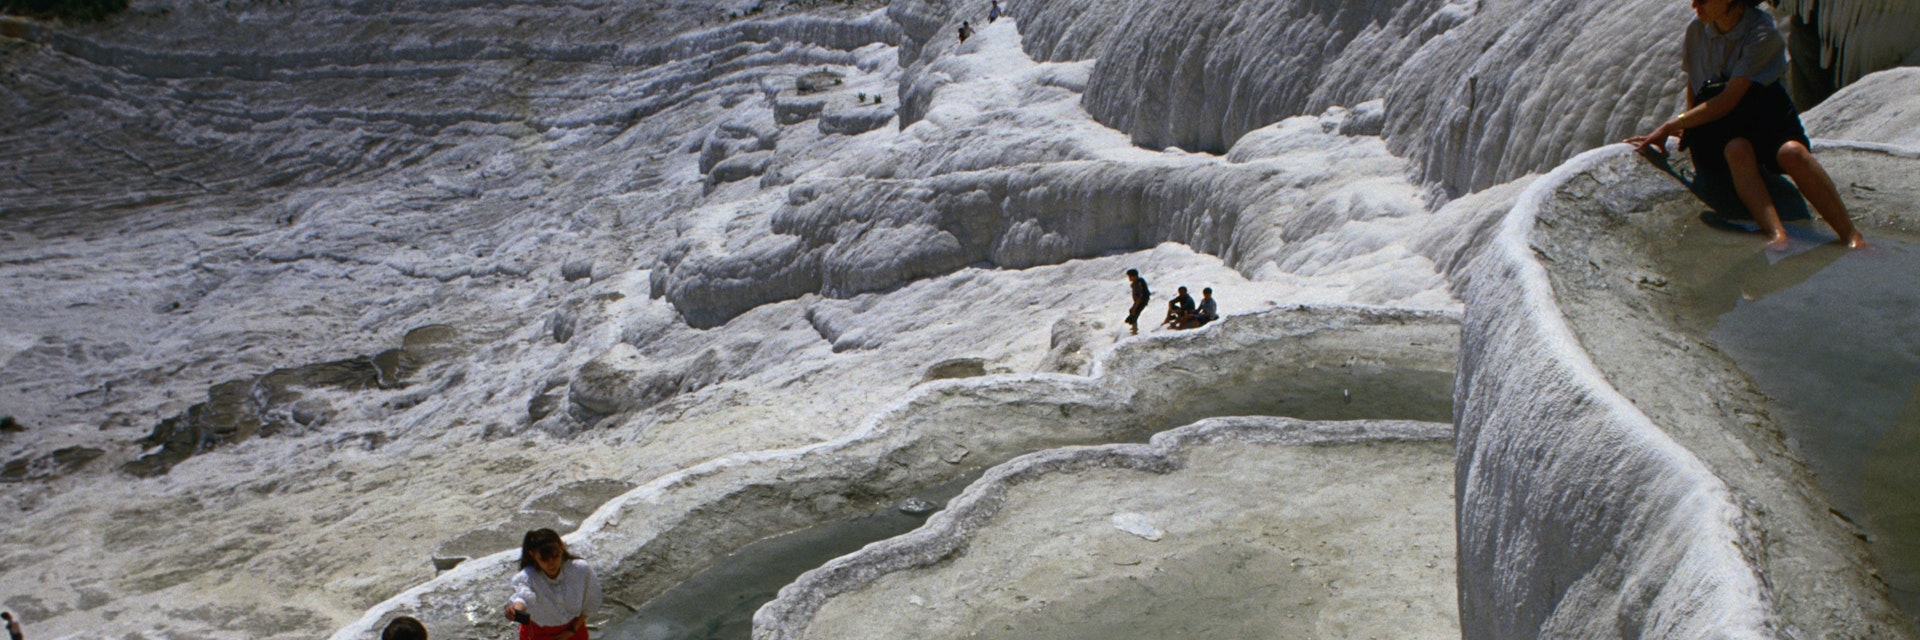 Calcium laden mineral waters cascade over the cliffs of Pamukkale, and as it cools the calcium, it precipitates and clings to the cliffs forming the snow like waterfalls of white stone, however, due to circumstances the site has deteriorated substantially over the years